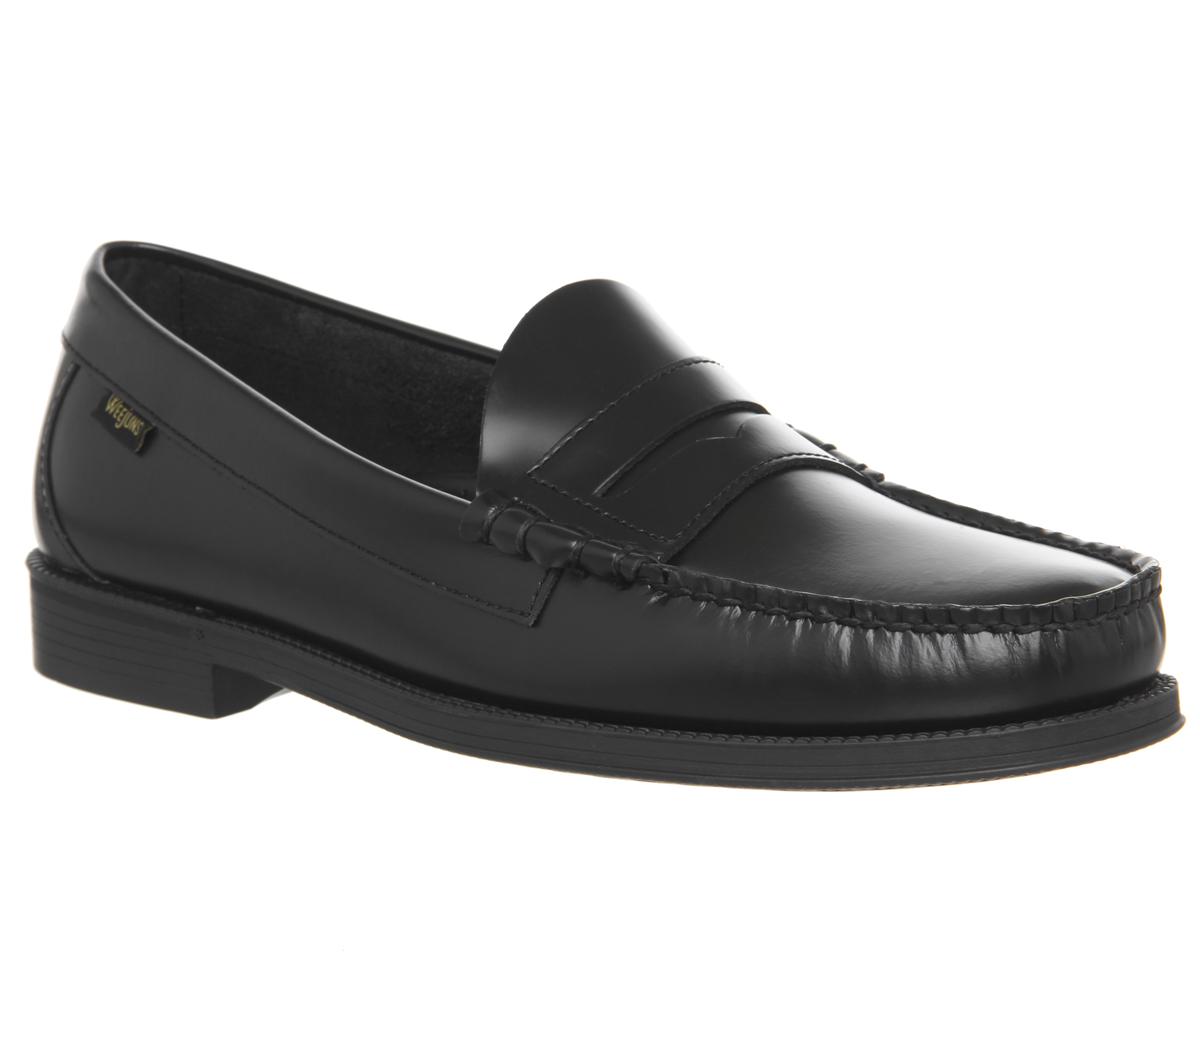 G.H Bass & Co Easy Weejun Penny Loafers Black - Men’s Smart Shoes